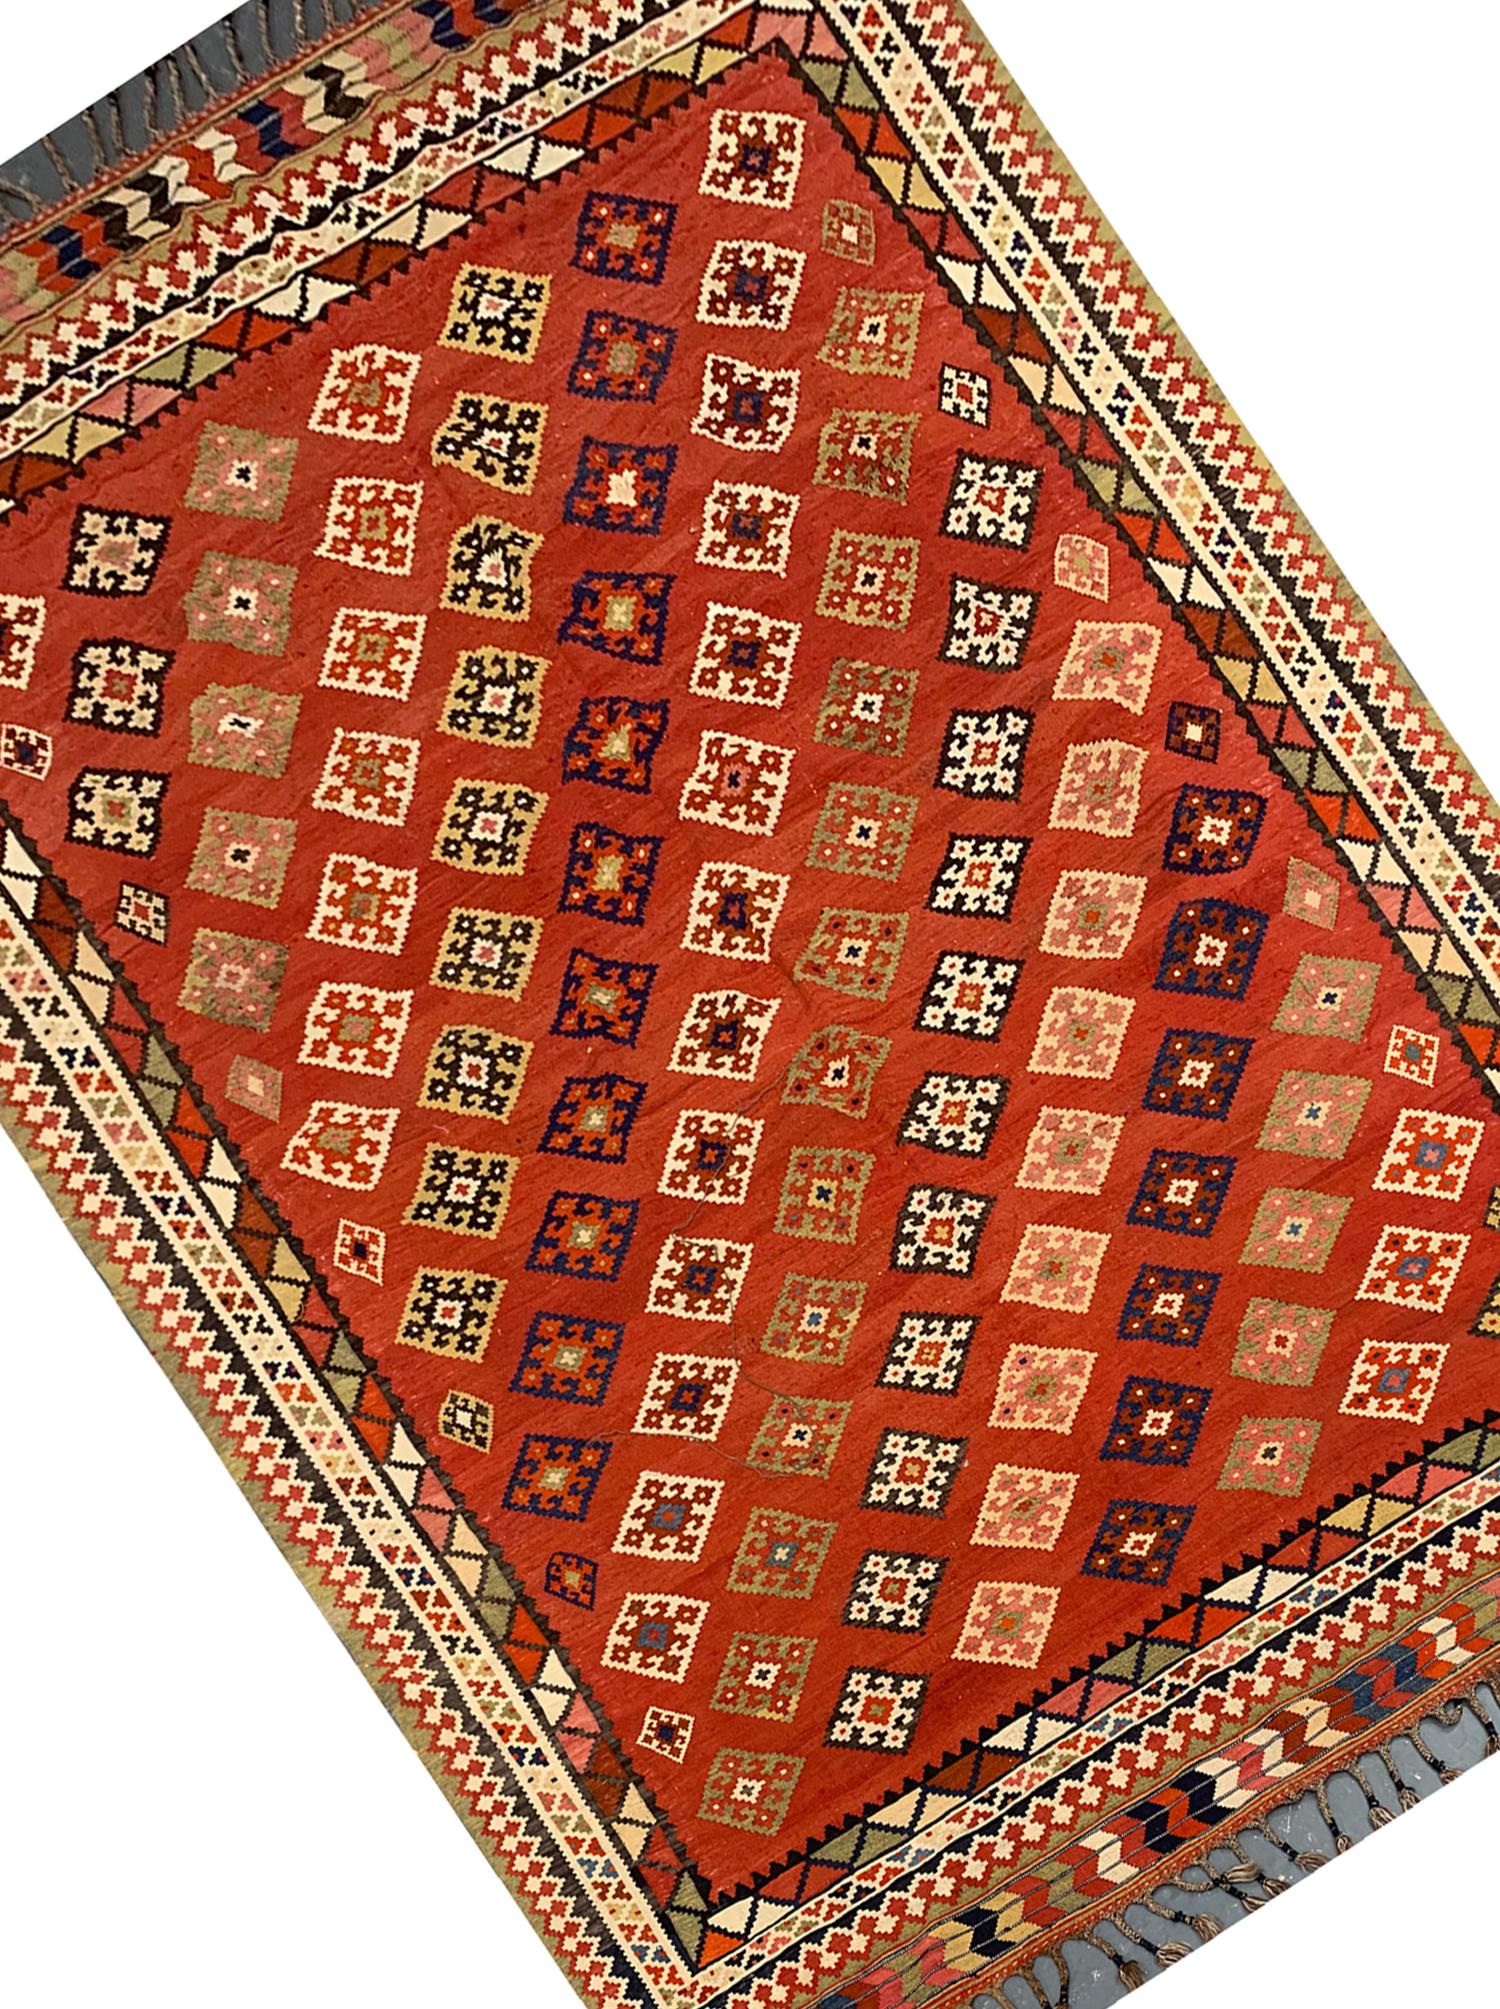 This piece is an excellent example of caucasian rugs woven by hand in the 1890s with an elegant diagonal repeat motif pattern woven with accents of blue, green and beige. This has then been framed by a layered border with cream accents. Both the